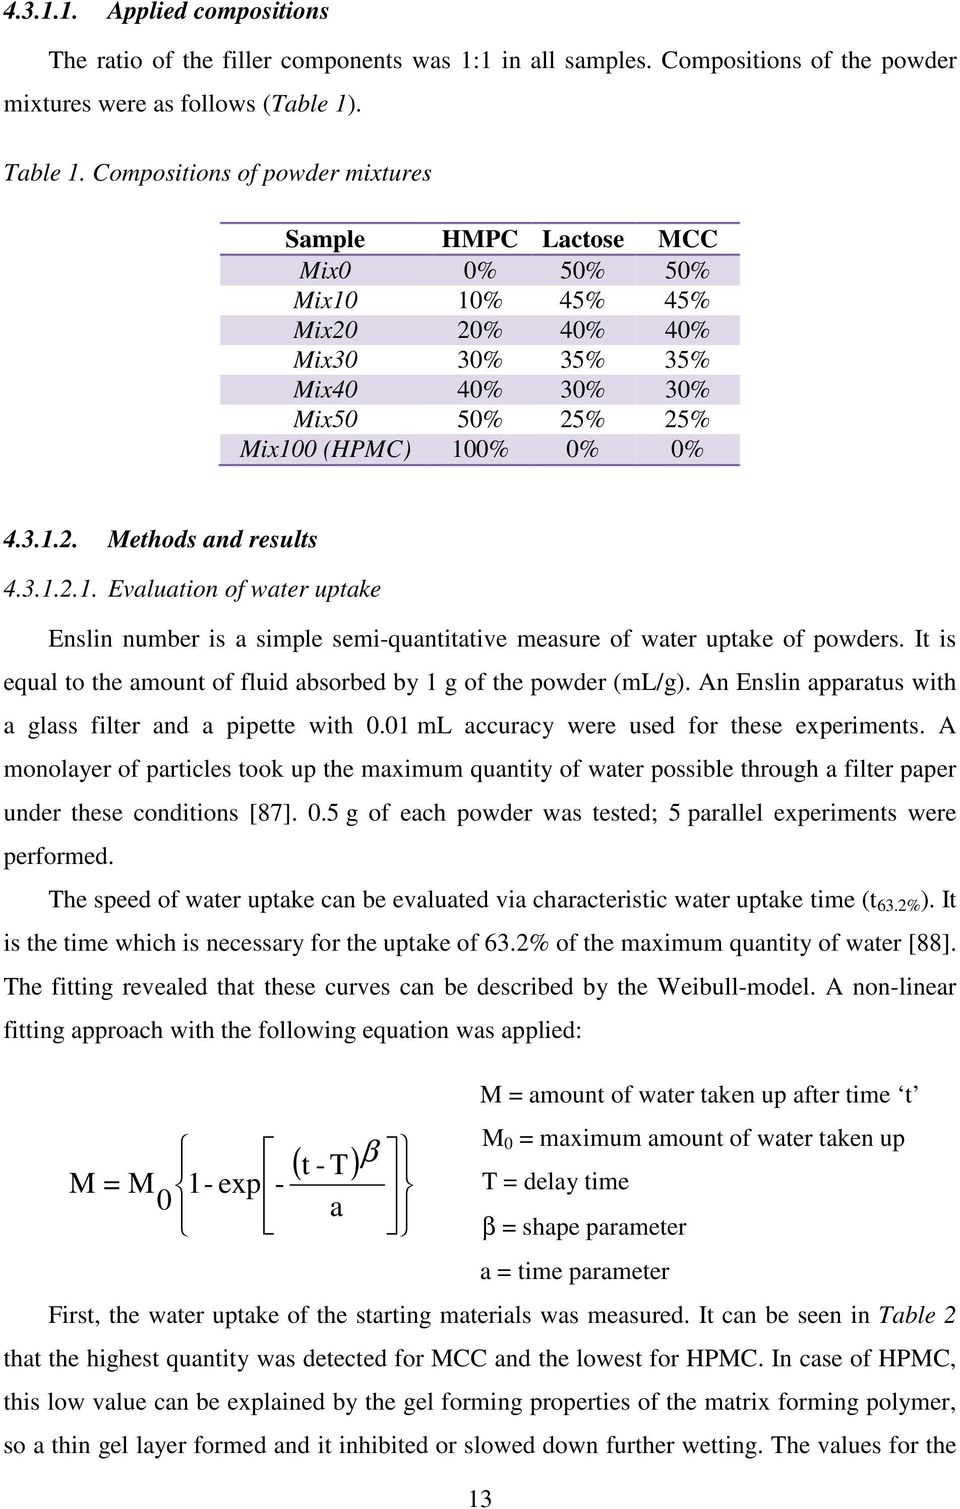 3.1.2.1. Evaluation of water uptake Enslin number is a simple semi-quantitative measure of water uptake of powders. It is equal to the amount of fluid absorbed by 1 g of the powder (ml/g).